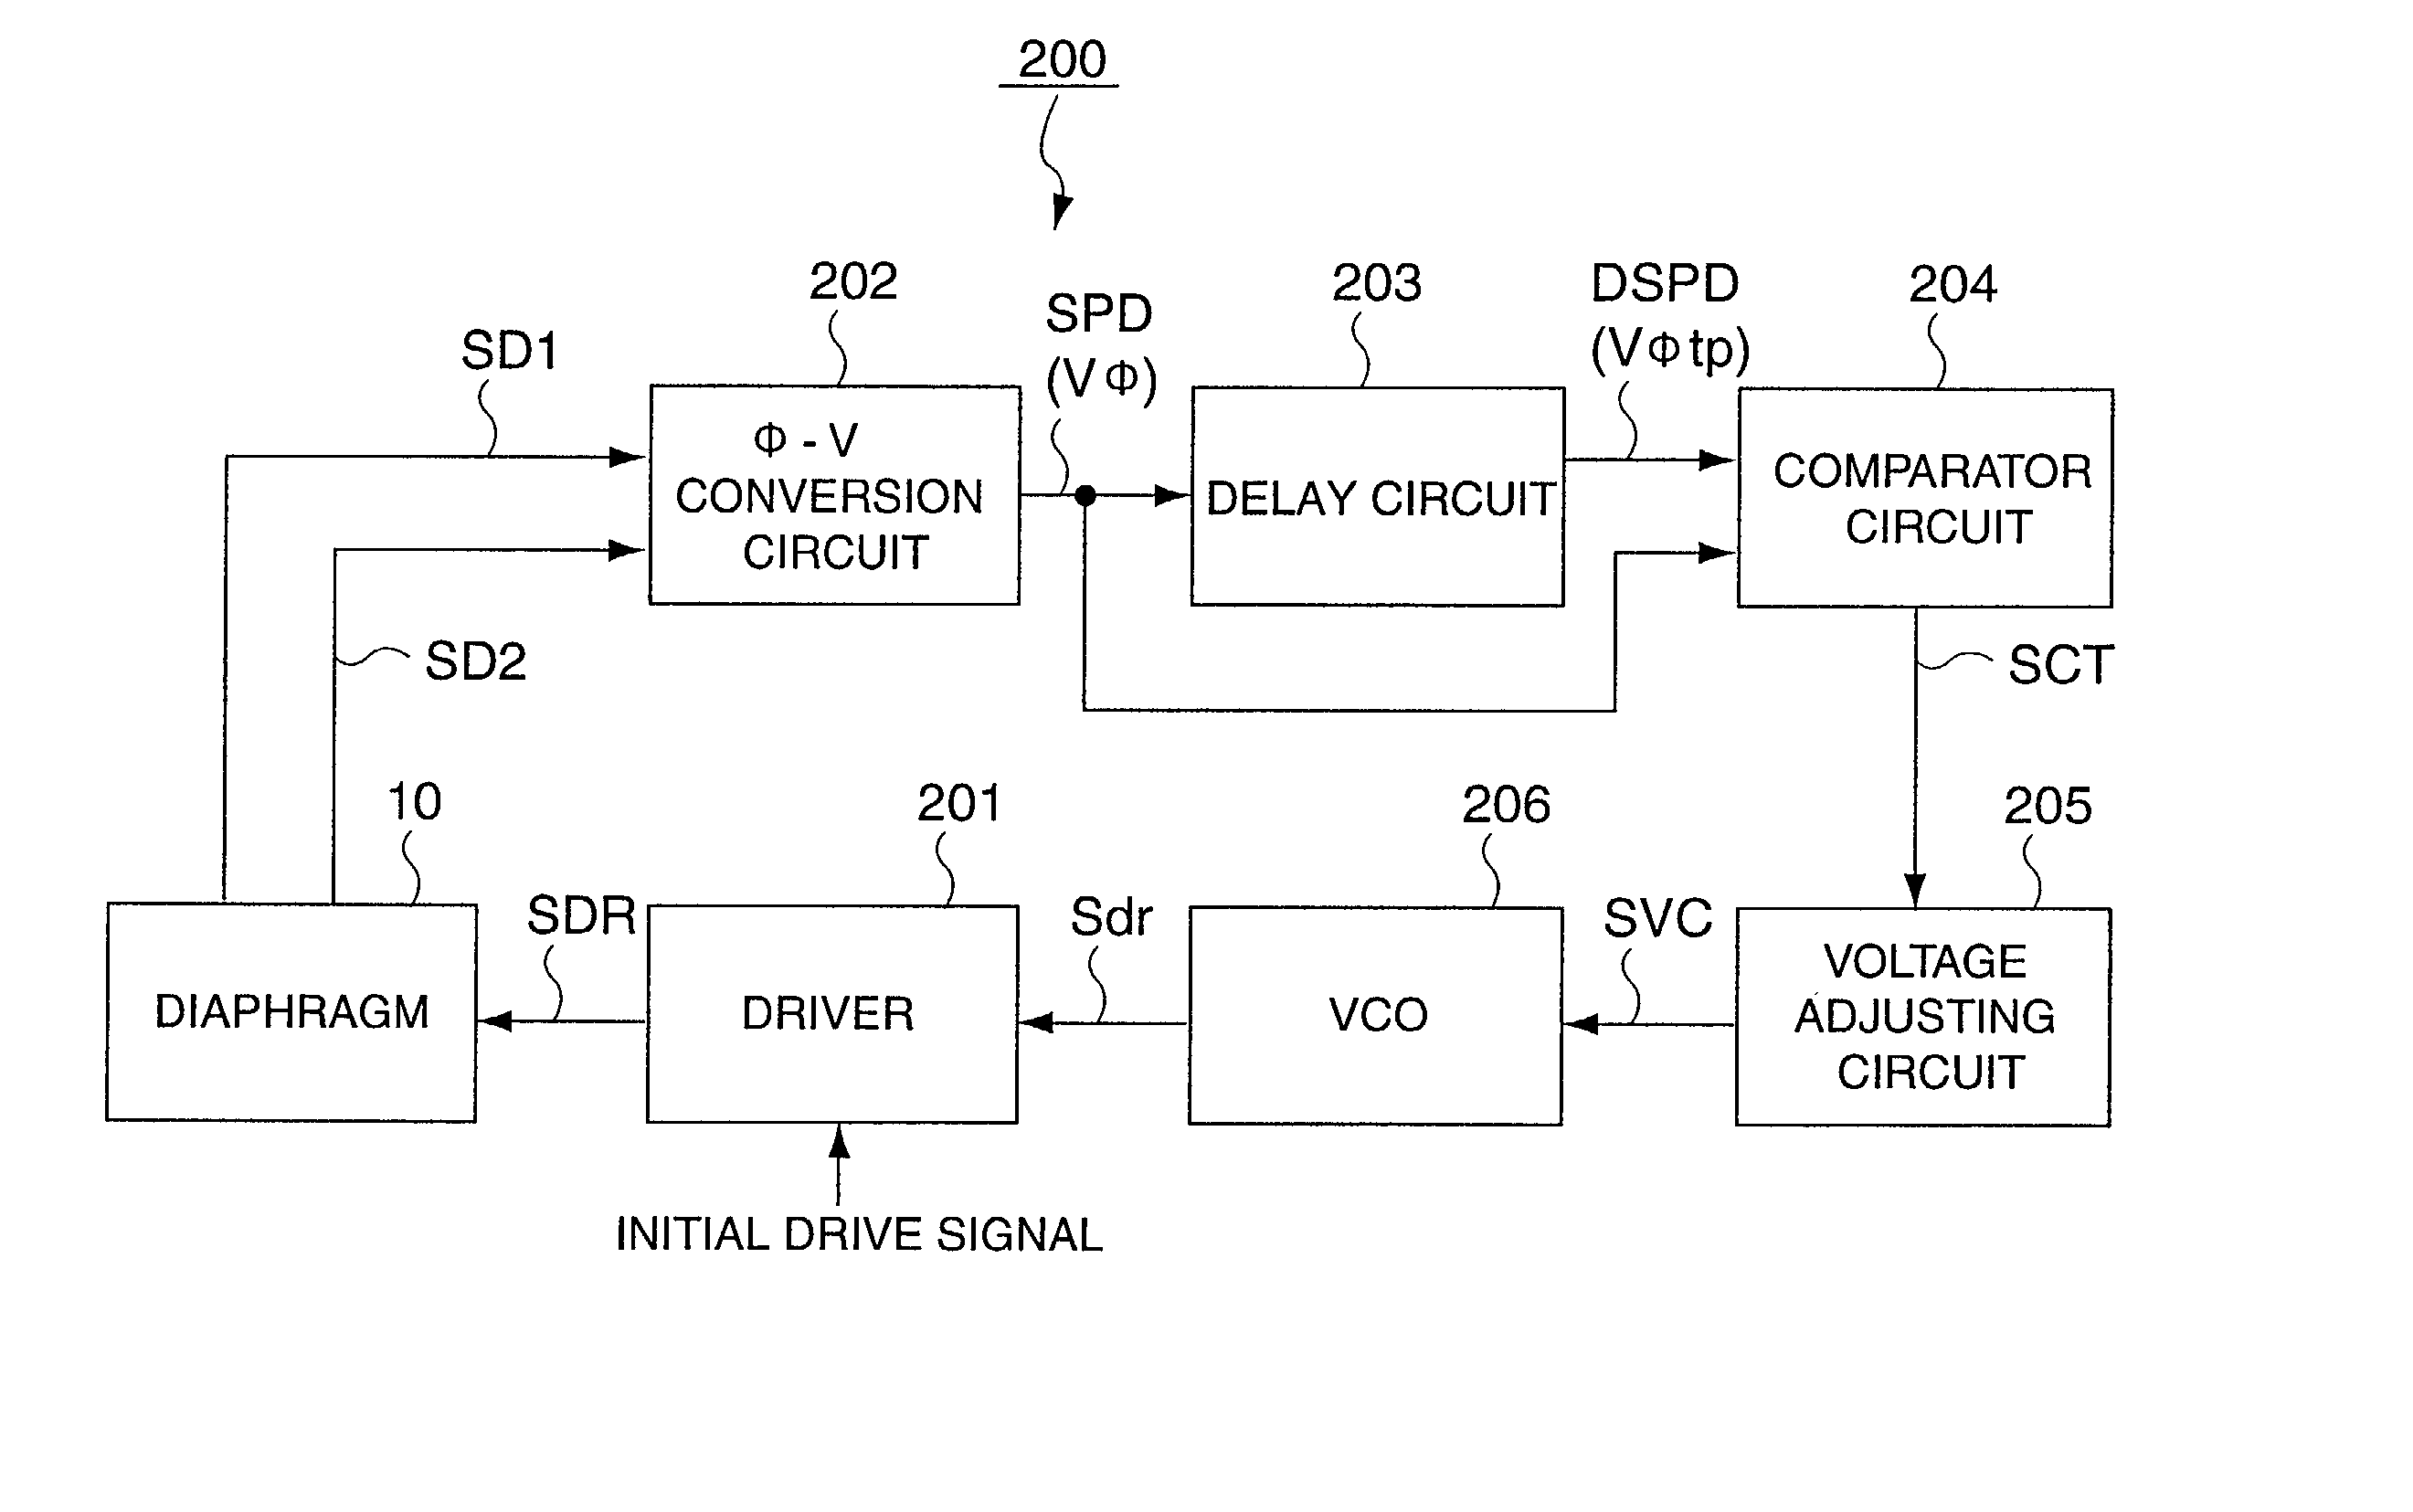 Piezoactuator and drive circuit therefor